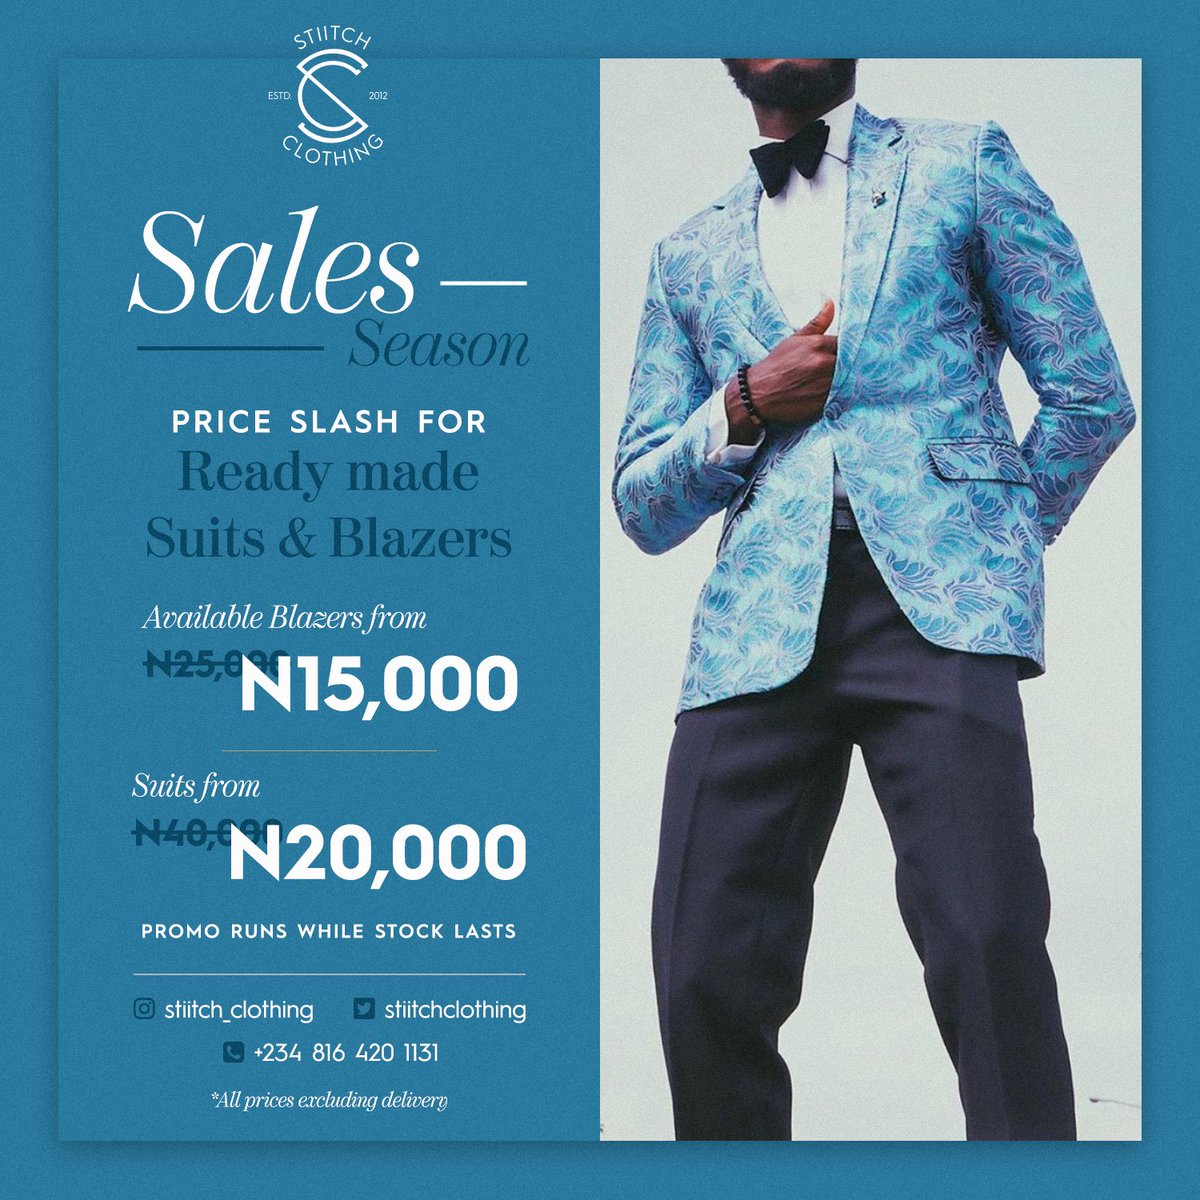 It’s SALES SZN from your Suit Plug!  Get Beautiful Ready Made Suits at Giveaway Prices from Us while stock Lasts.Add that Stiitch Spice to your Wardrobes this Season  #stiitch  #madeinnigeria  #suits  #blazers  #style  #fashion  #menswear  #womenswear  #dapper  #nigeria